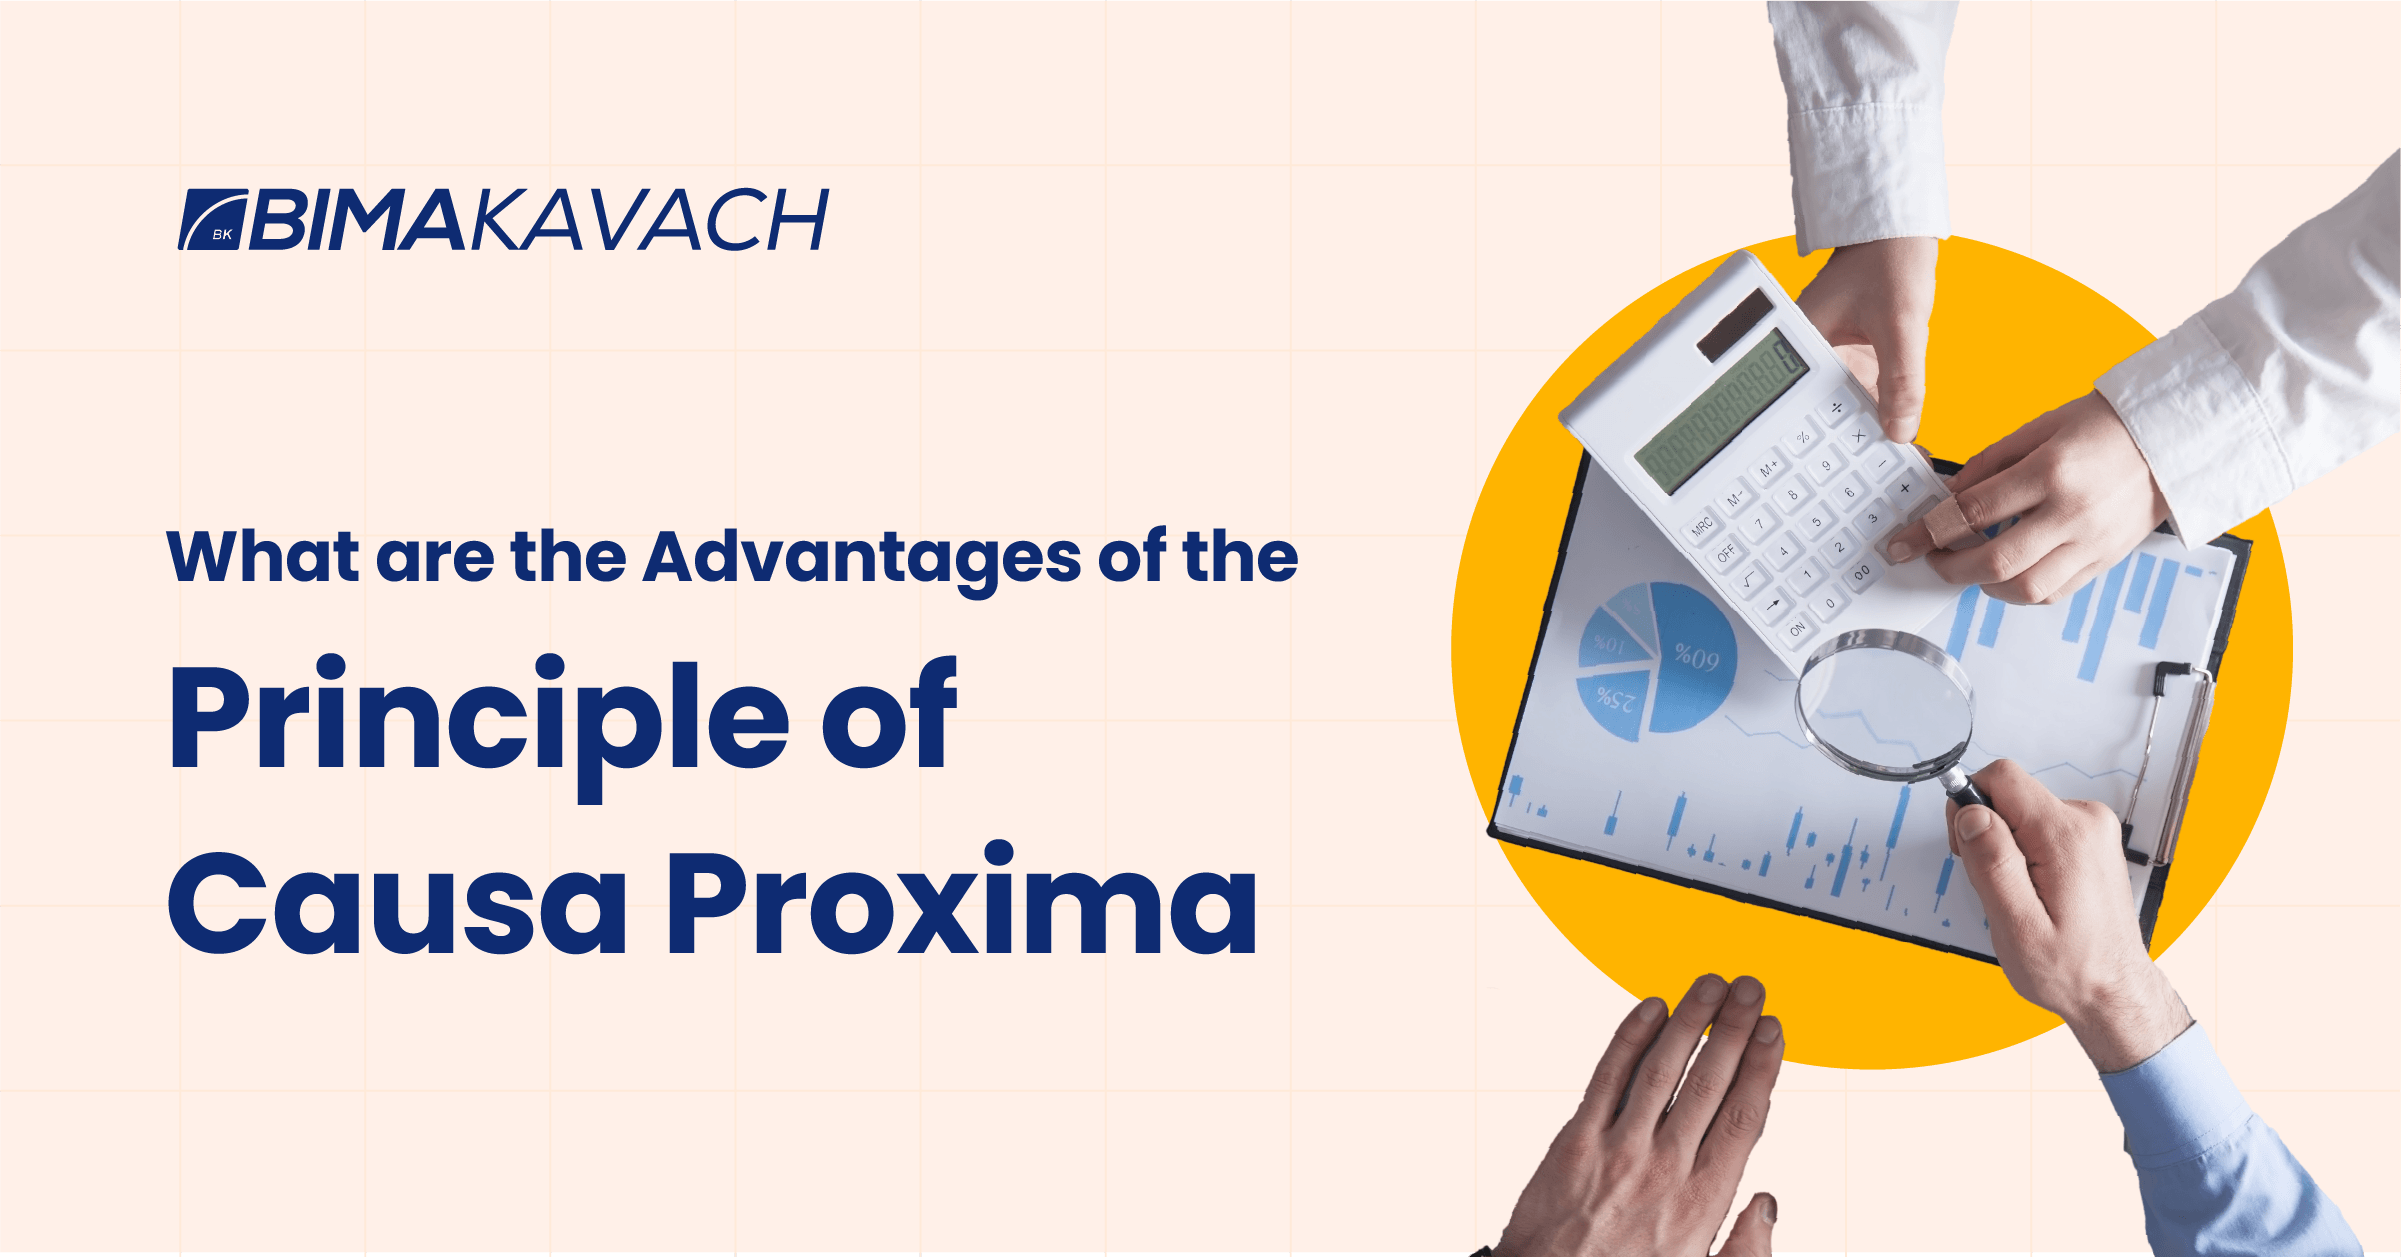 What are the Advantages of the Principle of Causa Proxima?